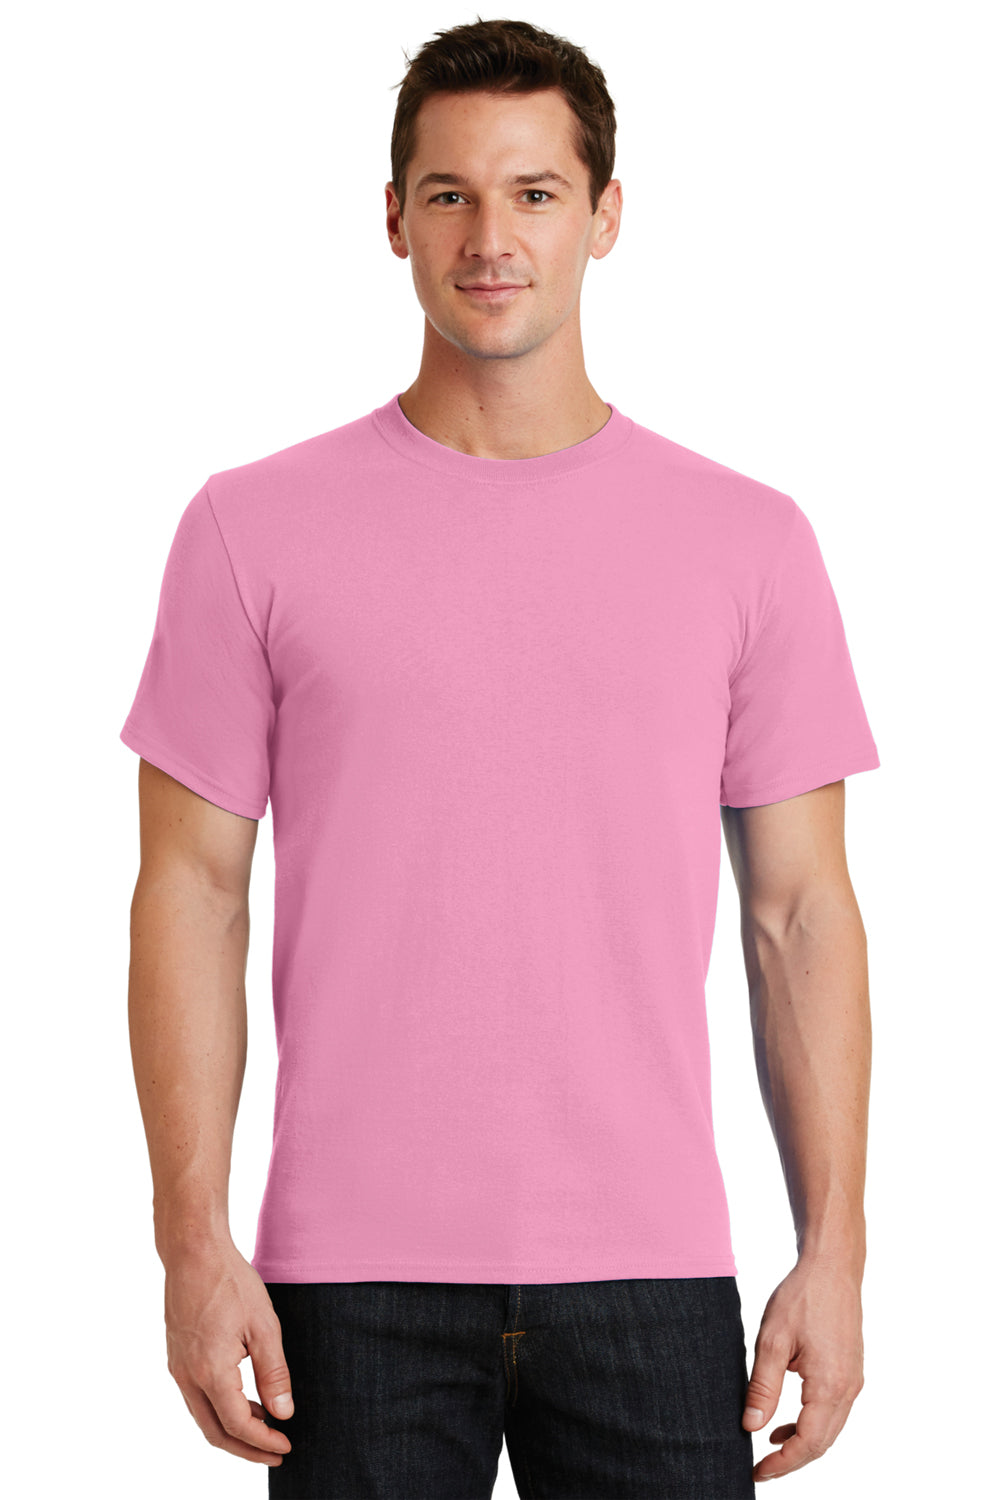 Port & Company PC61 Mens Essential Short Sleeve Crewneck T-Shirt Candy Pink Front